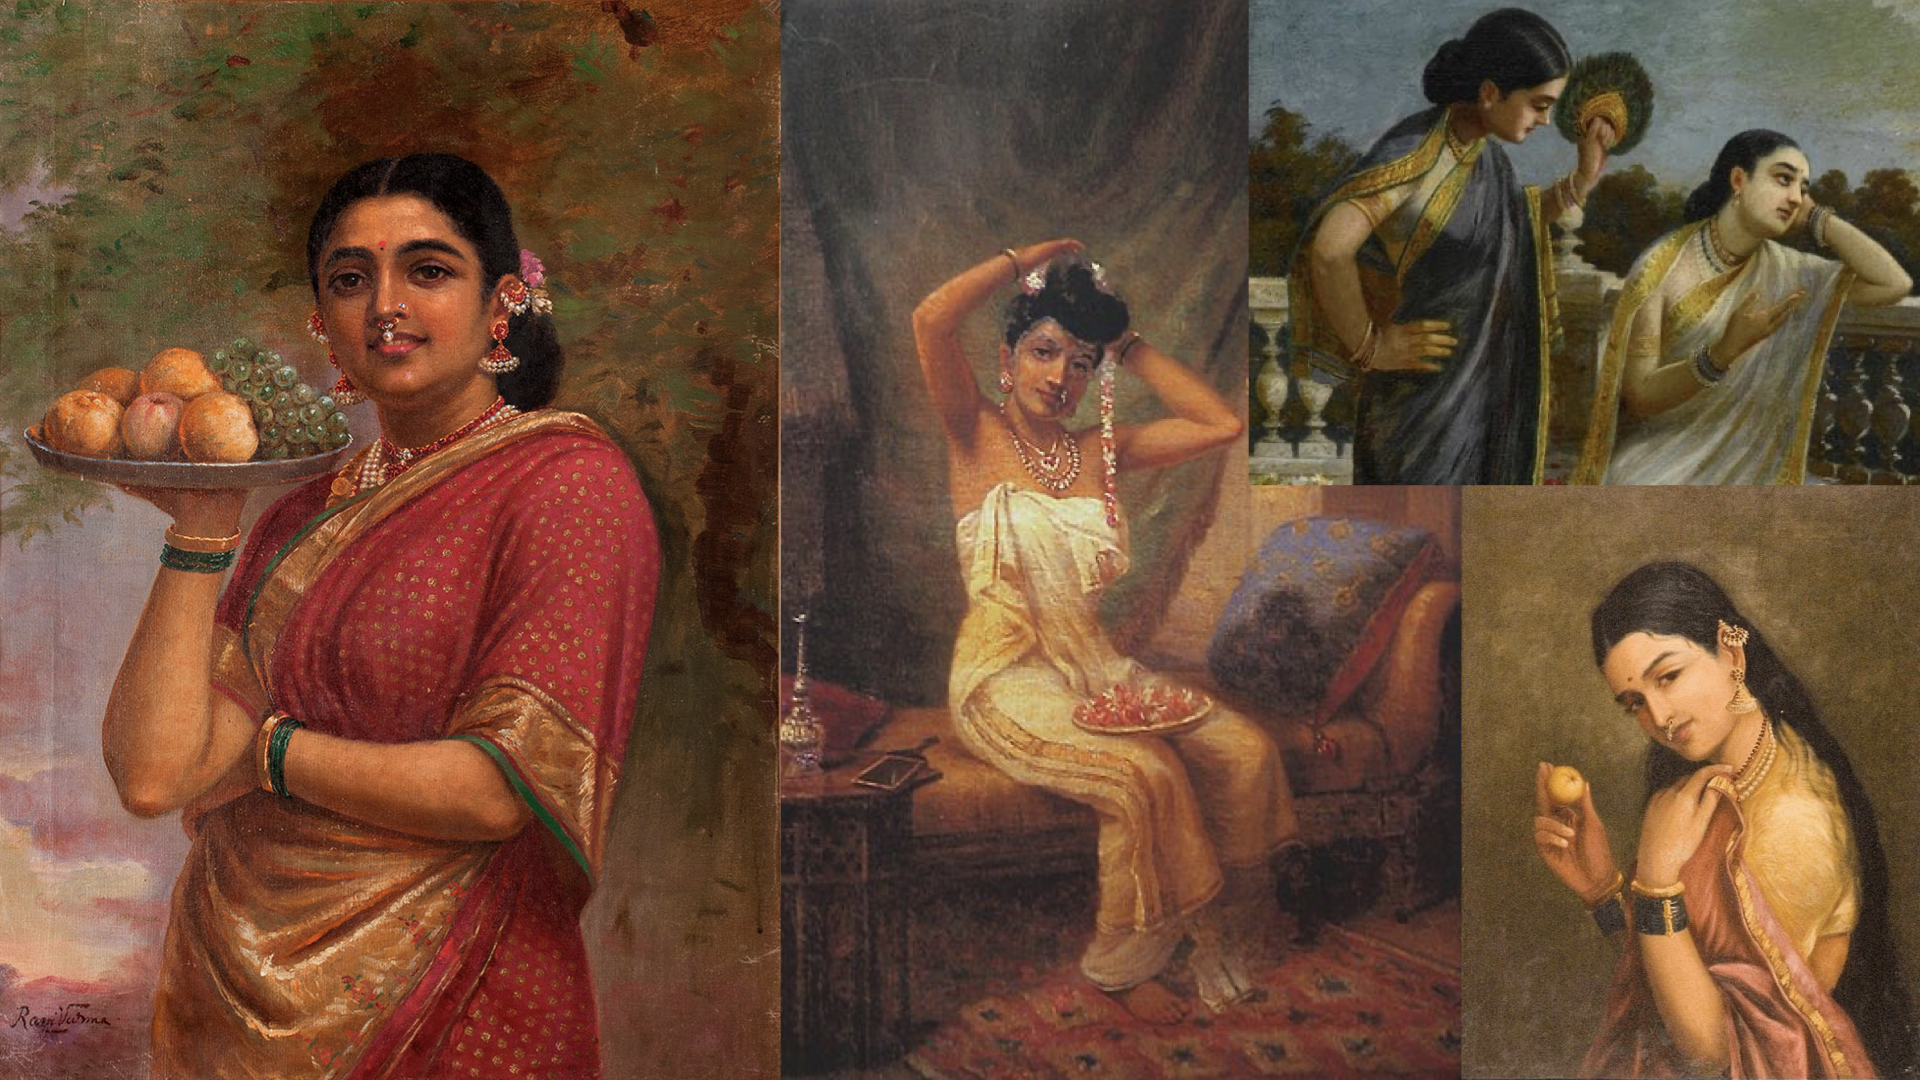 Raja Ravi Varma  An Indian artist whose legacy still lives on through his  works  The Pamphlet